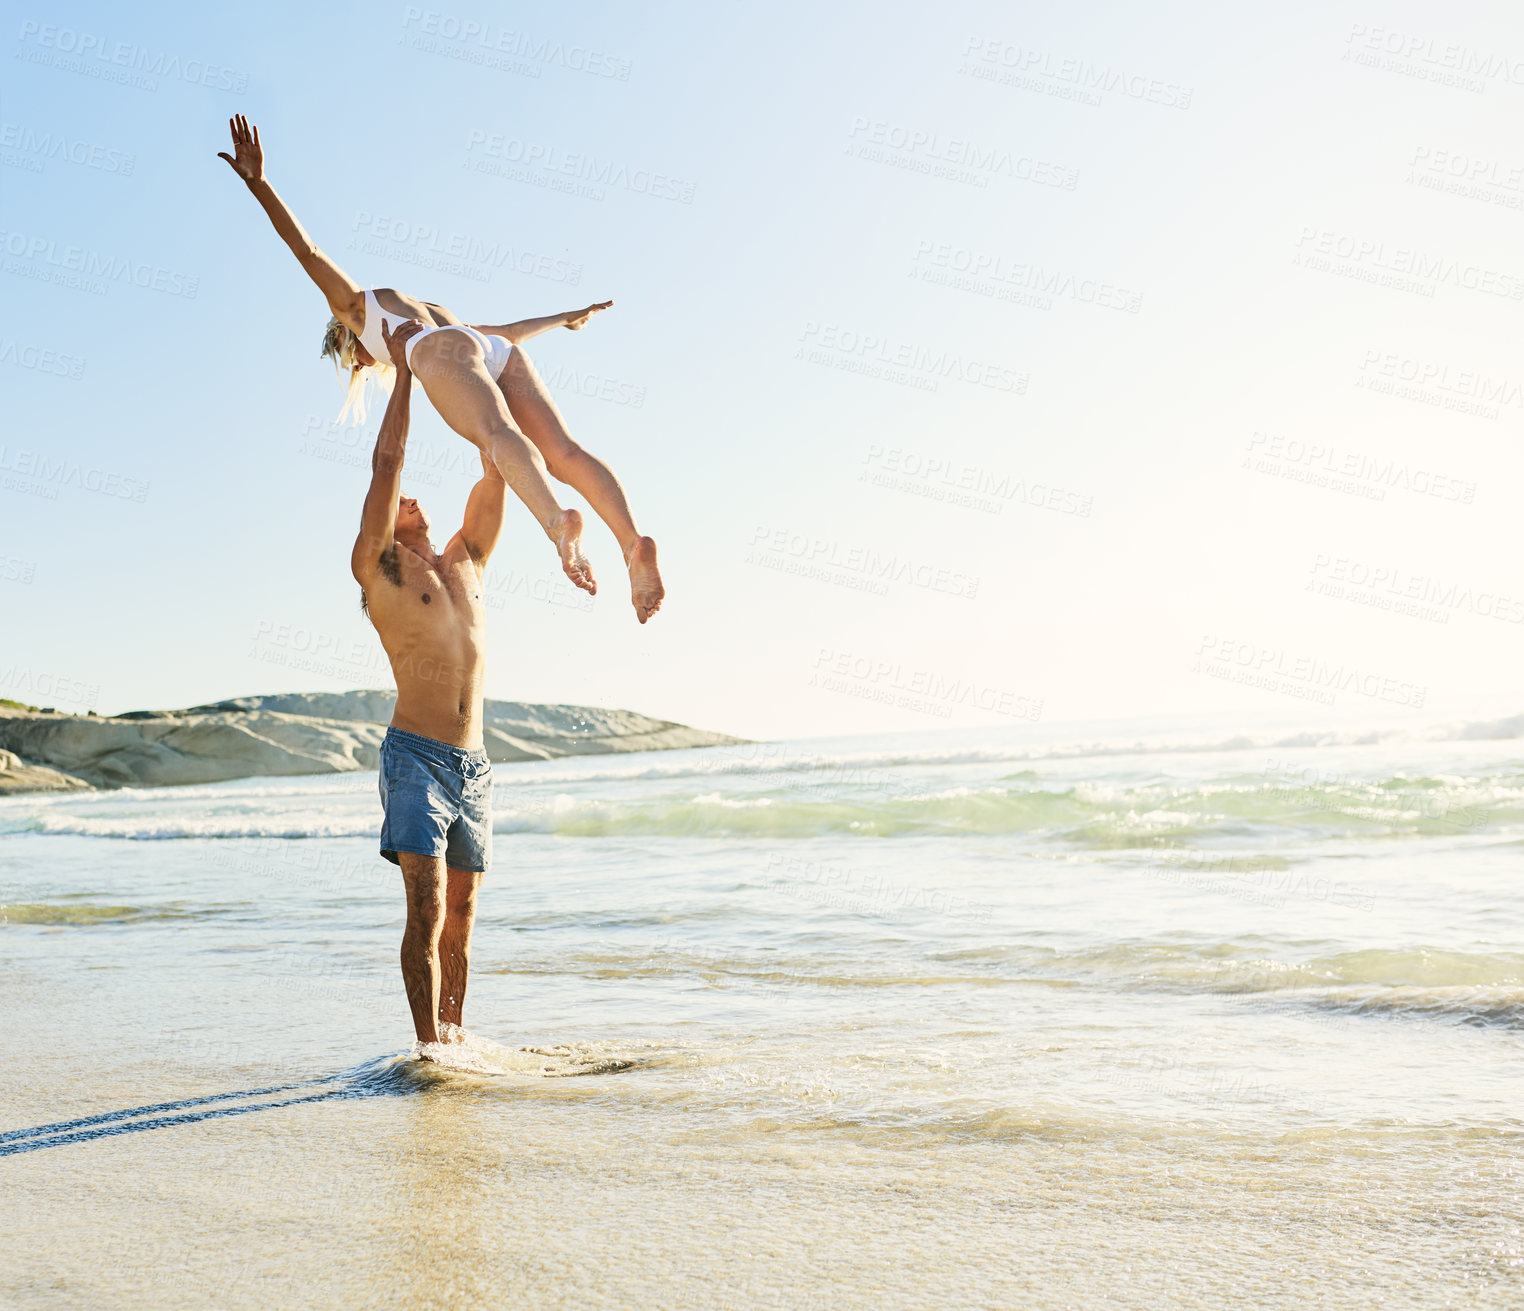 Buy stock photo Shot of a young man lifting his girlfriend up into the air at the beach